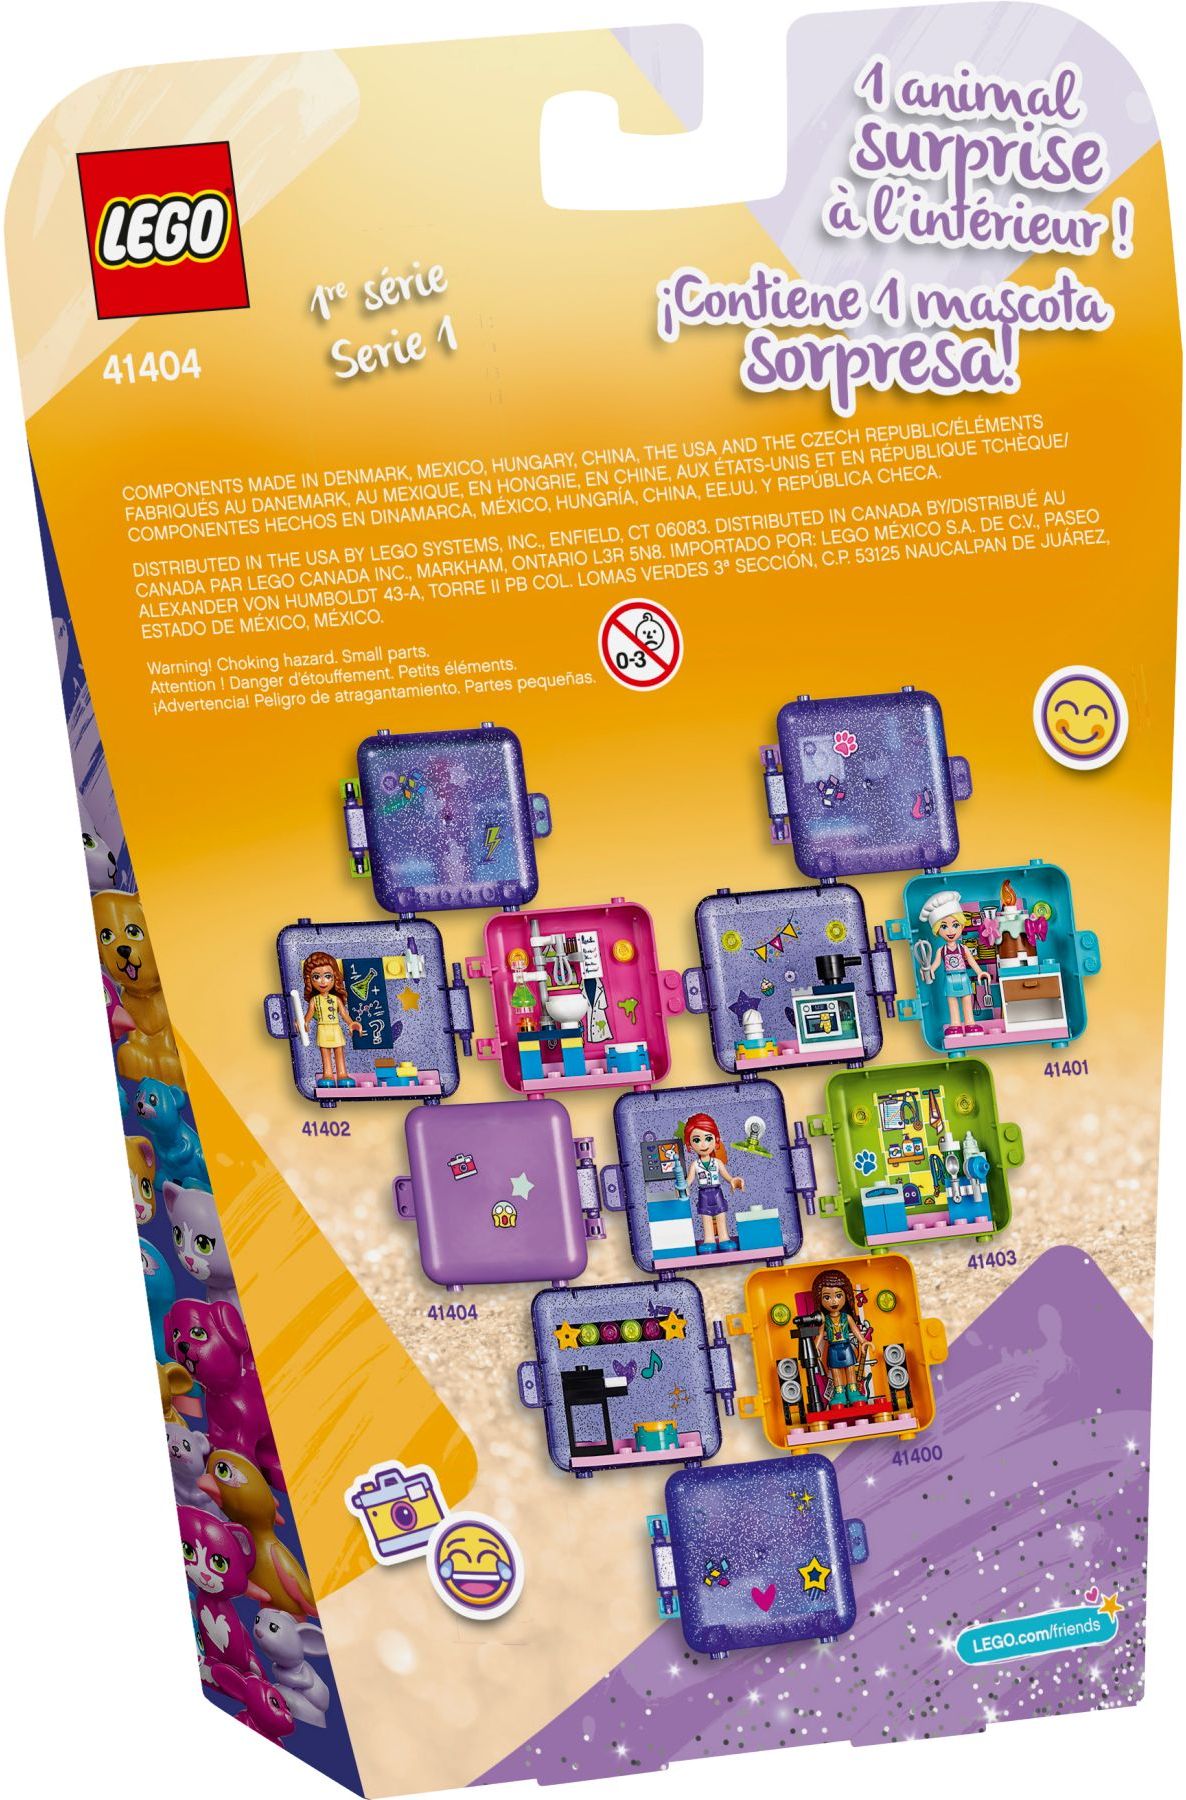 New 2020 36 Pieces Includes Collectible Mini-Doll for Imaginative Play LEGO Friends Emma’s Play Cube 41404 Building Kit 